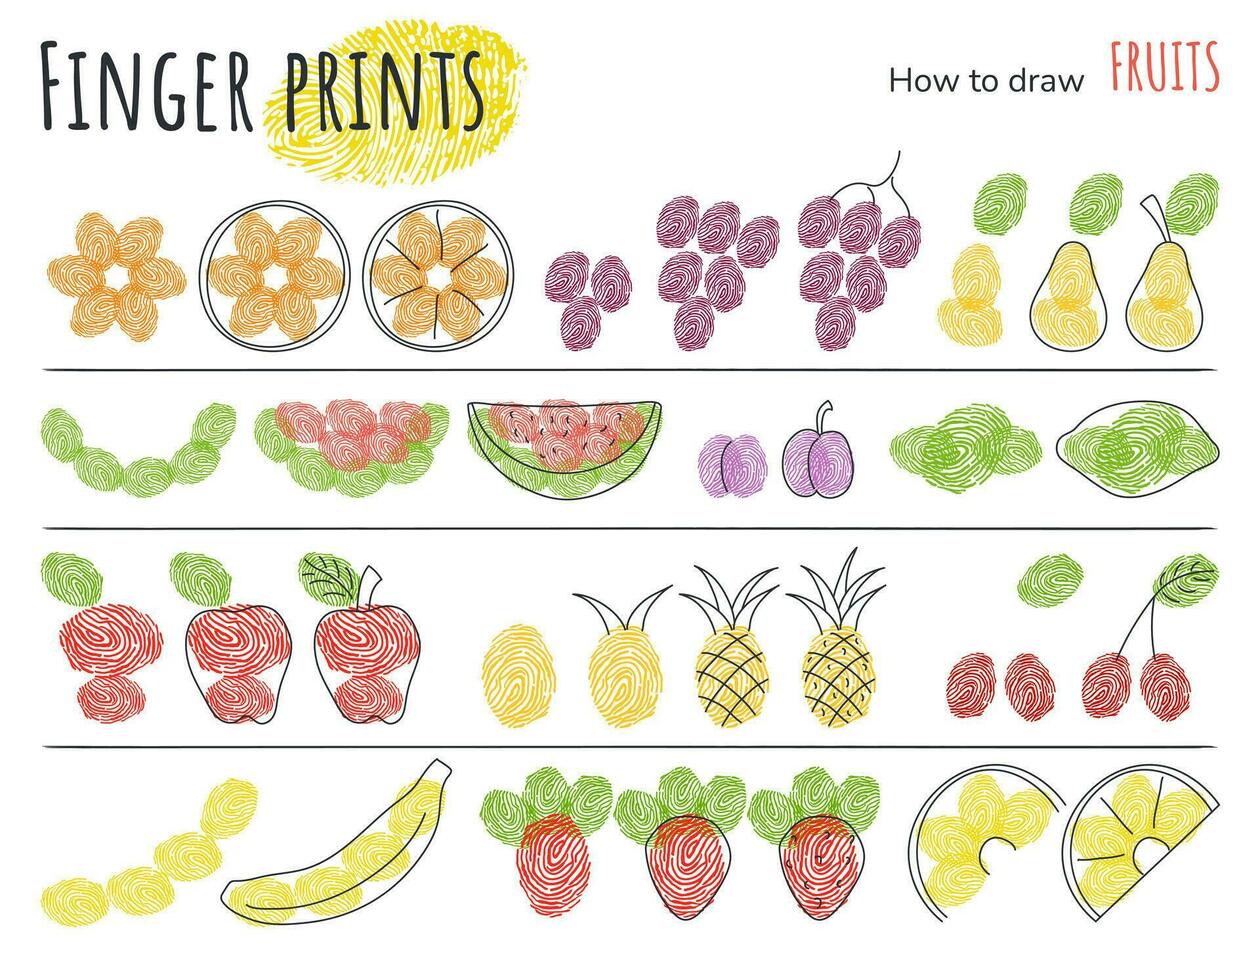 HOW TO DRAW FRUITS For Kids | Fresh Fruits Drawing - YouTube-saigonsouth.com.vn